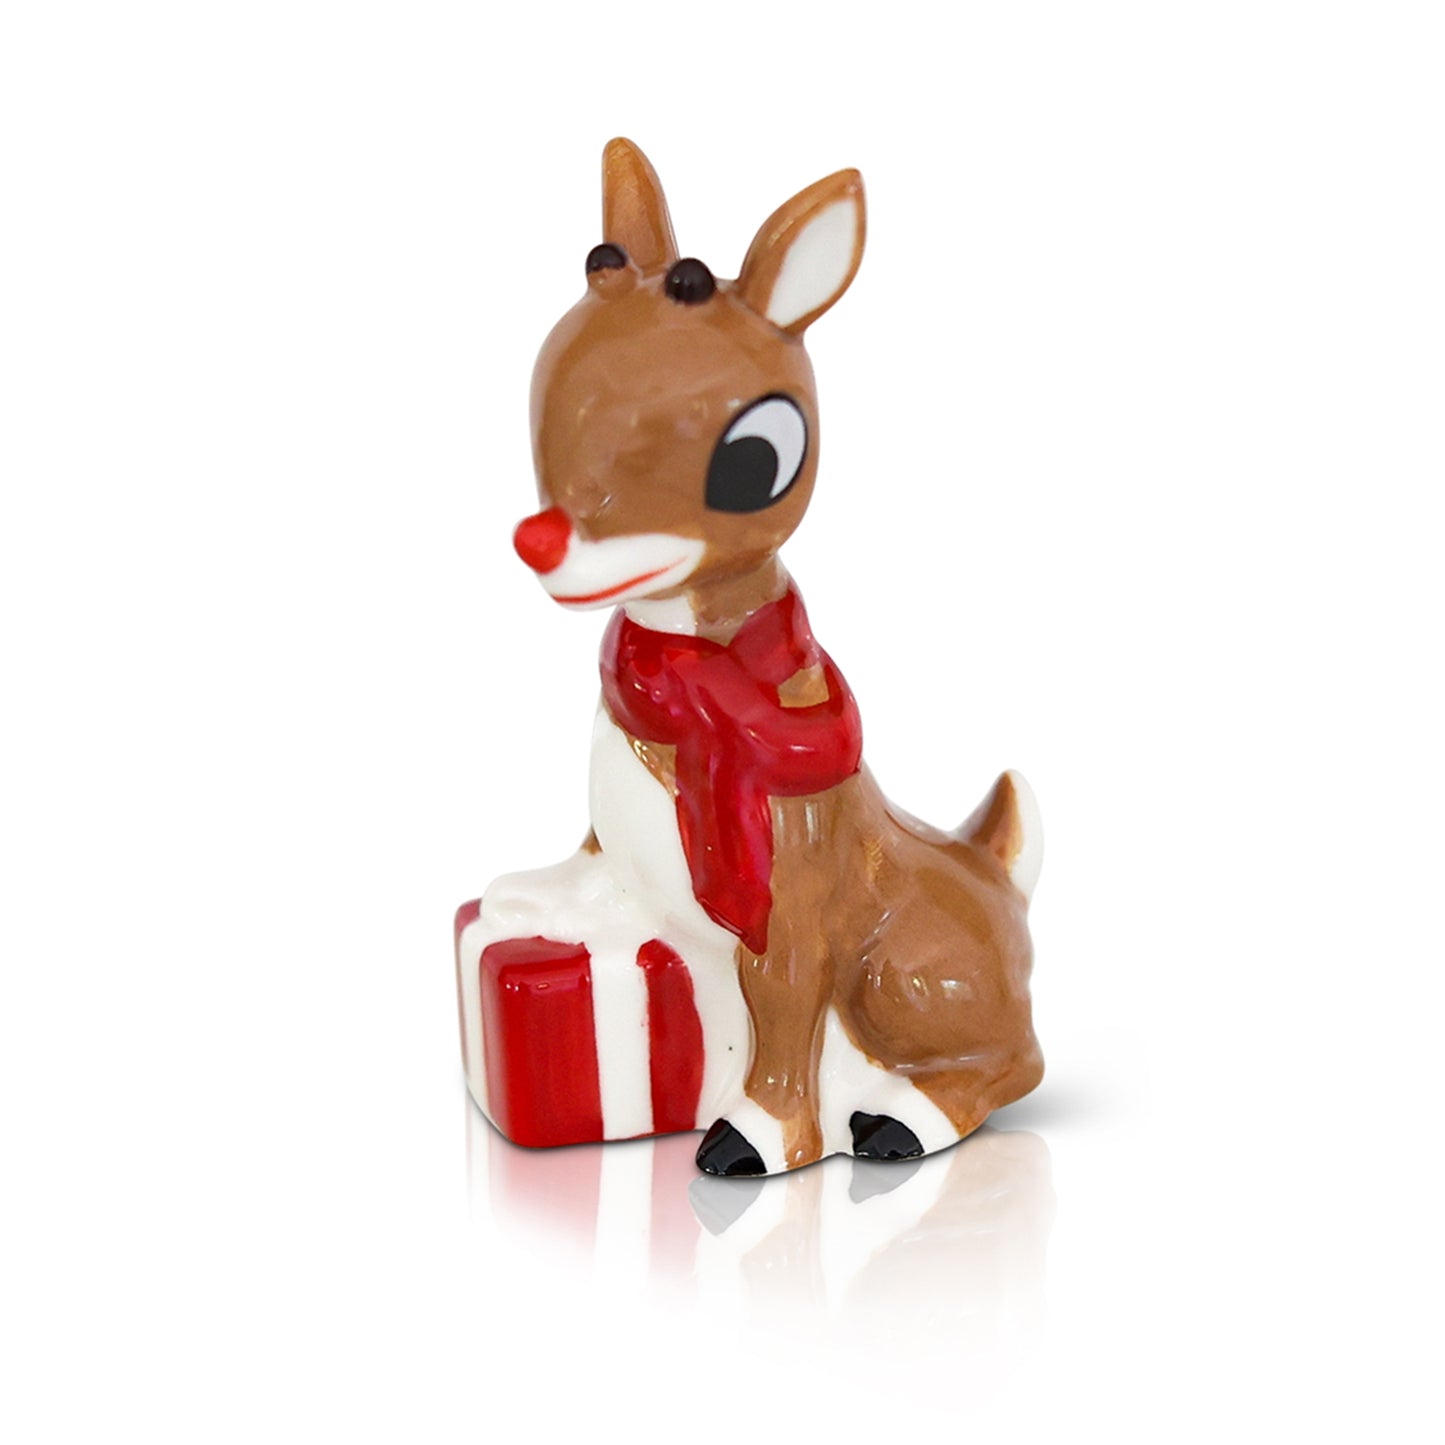 Rudolph the Red Nosed Reindeer - Nora Fleming Rudolph Mini